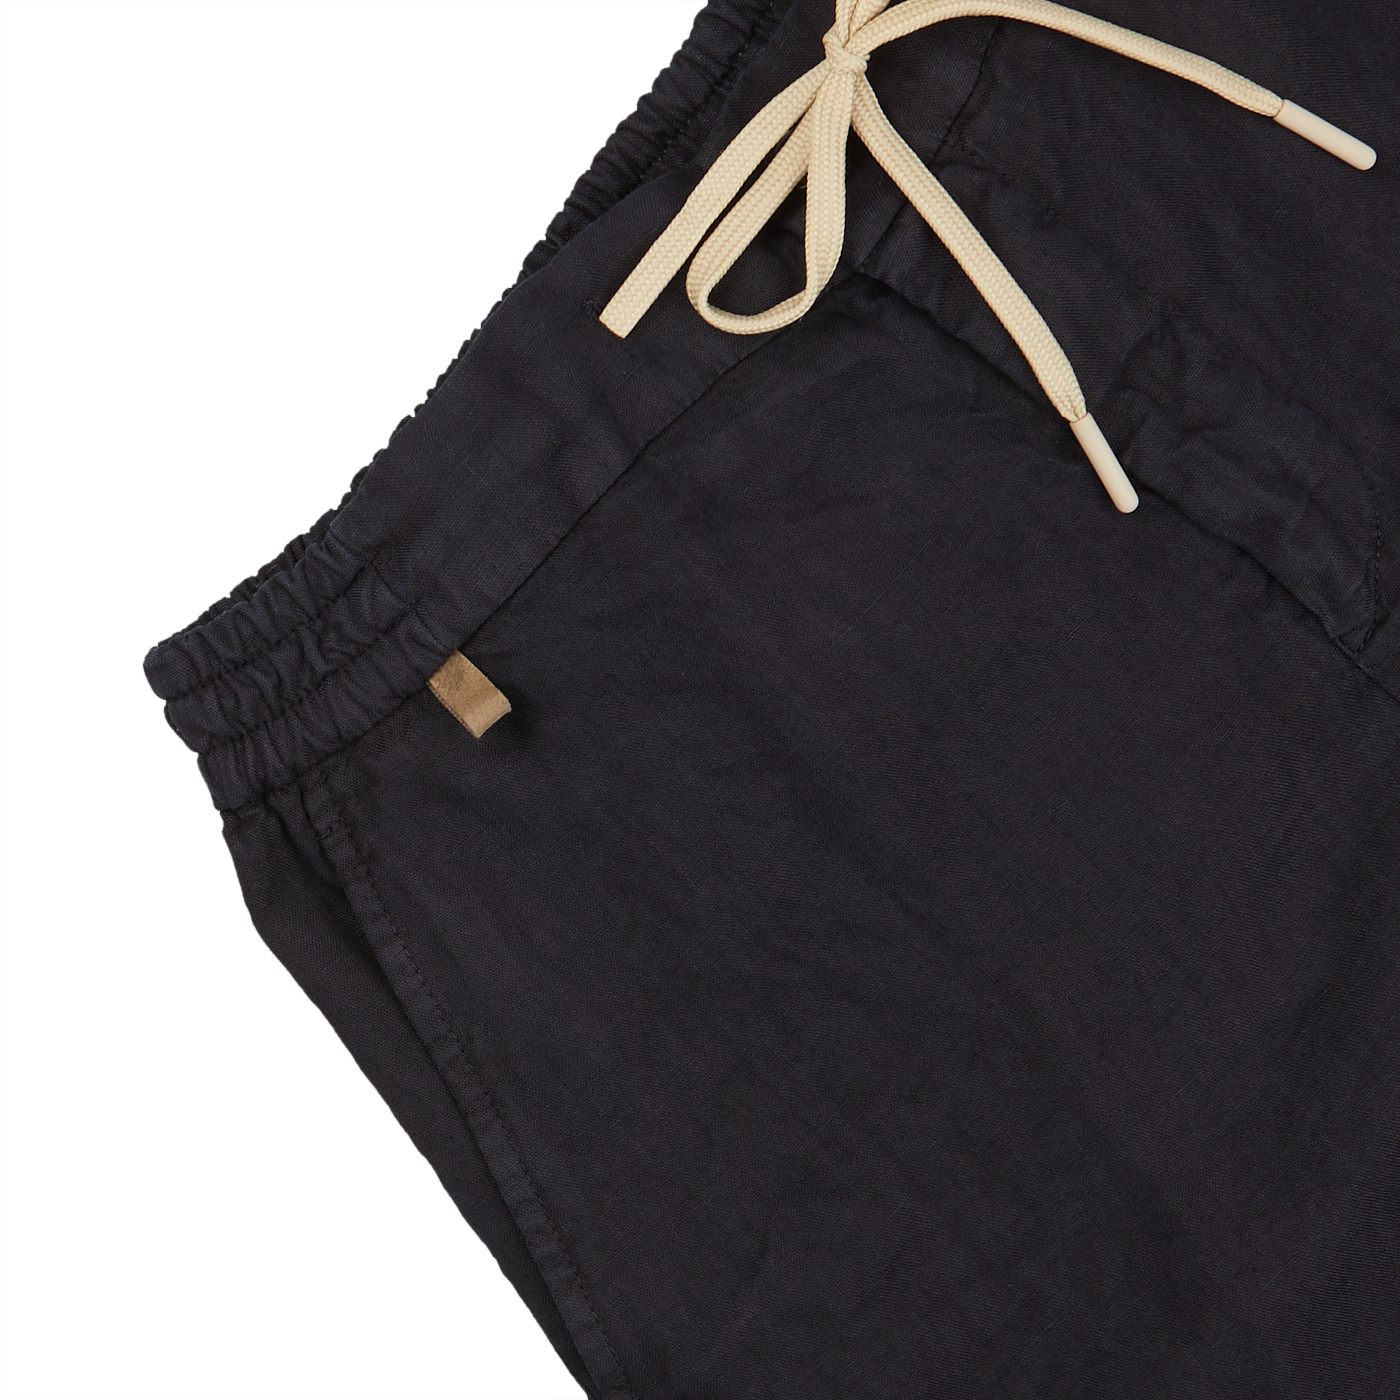 Close-up of Berwich Navy Blue Washed Linen Drawstring Shorts with elastic waistband on a white background.